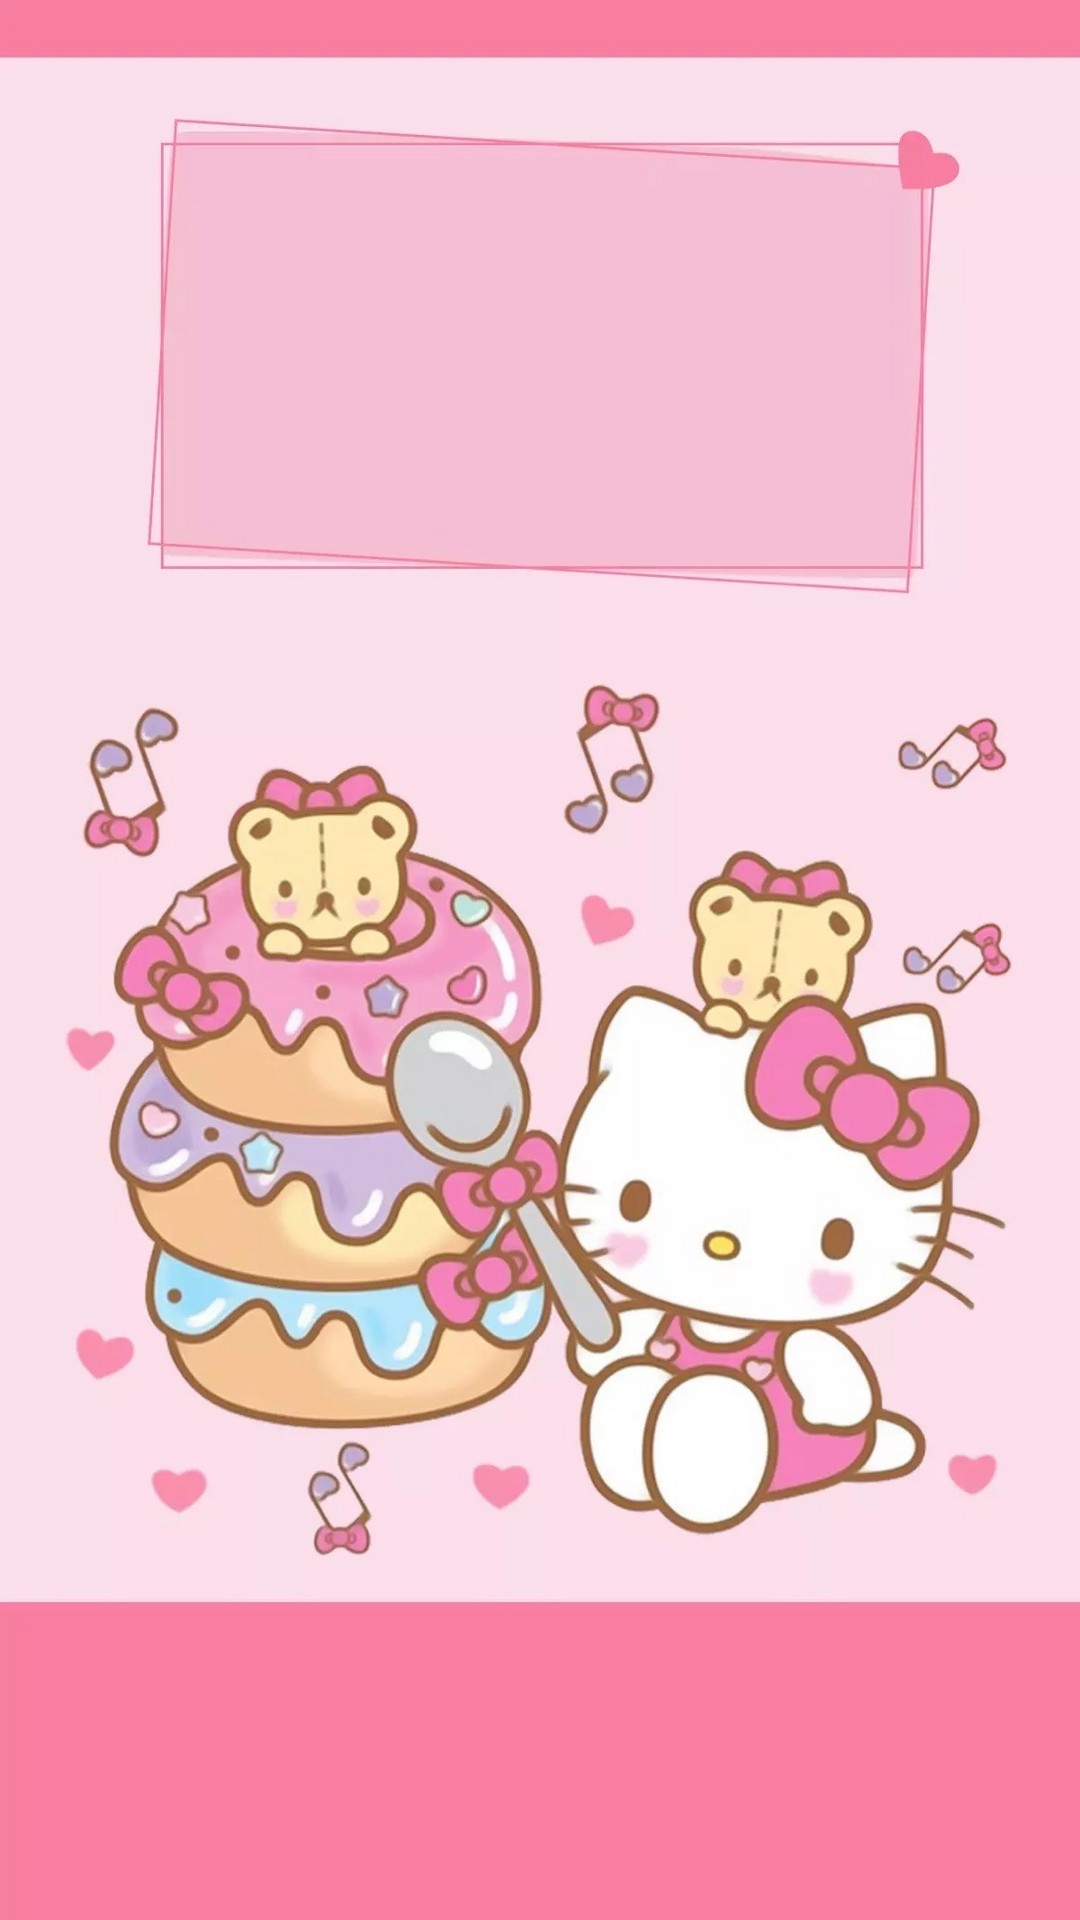 Hello Kitty iPhone 7 Wallpaper with image resolution 1080x1920 pixel. You can use this wallpaper as background for your desktop Computer Screensavers, Android or iPhone smartphones